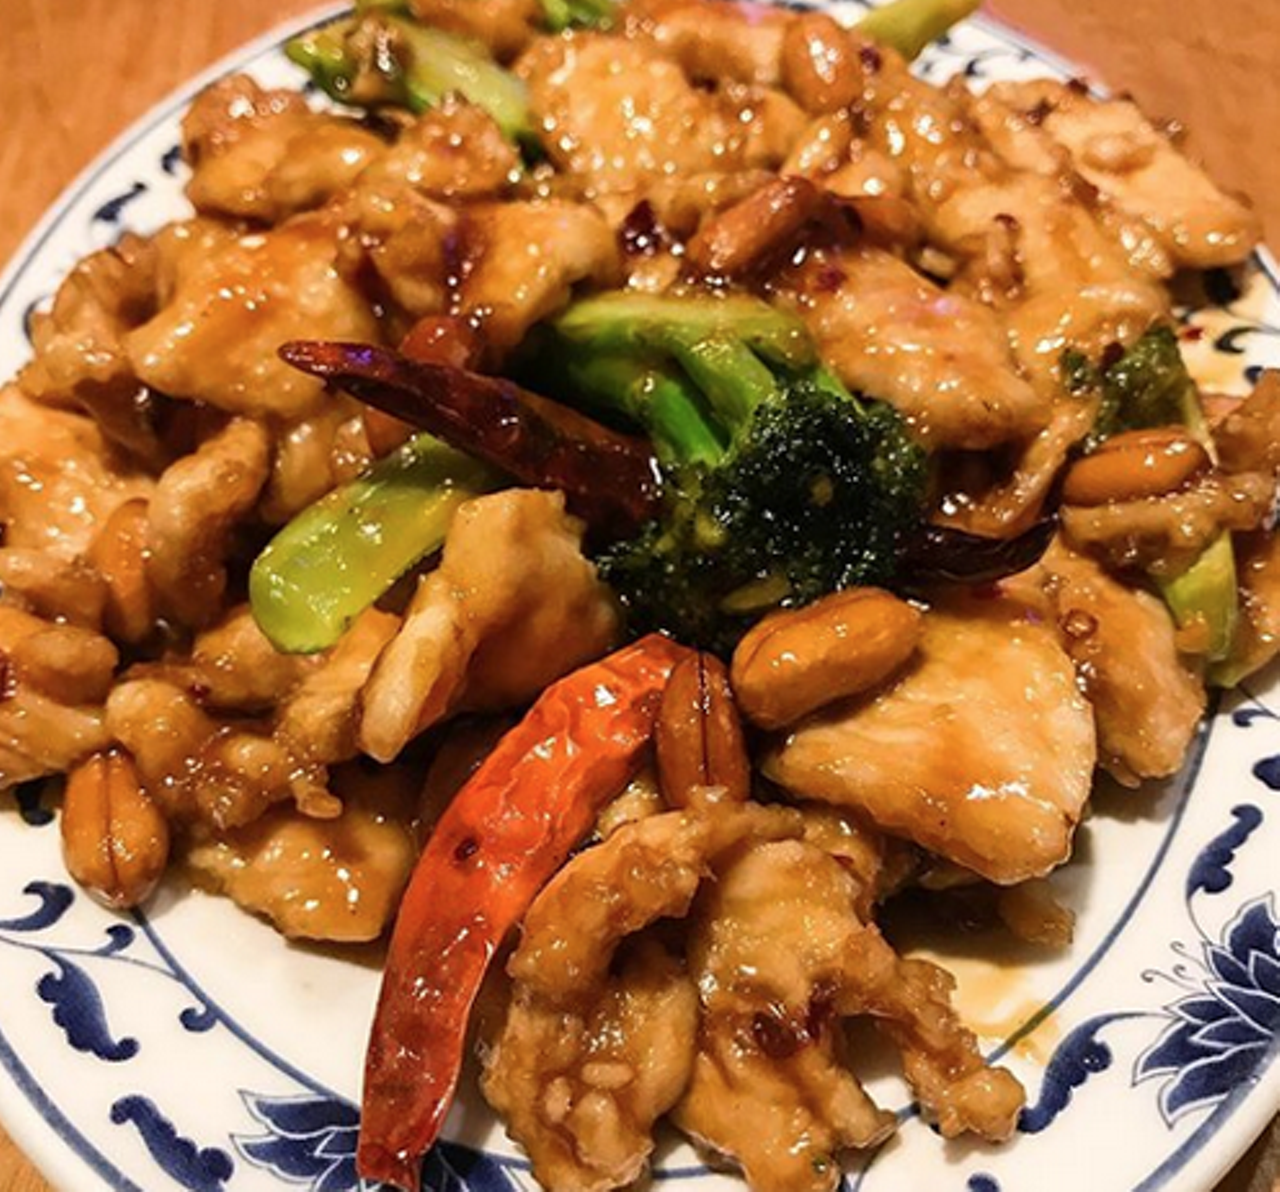 Formosa Garden
1011 NE Interstate 410 Loop, (210) 828-9988, formosagardensa.com
Offering a variety of both Chinese and Japanese dishes for pickup or delivery through Uber Eats, DoorDash and Grubhub. 
Photo via Instagram /  
sanantoniomunchies